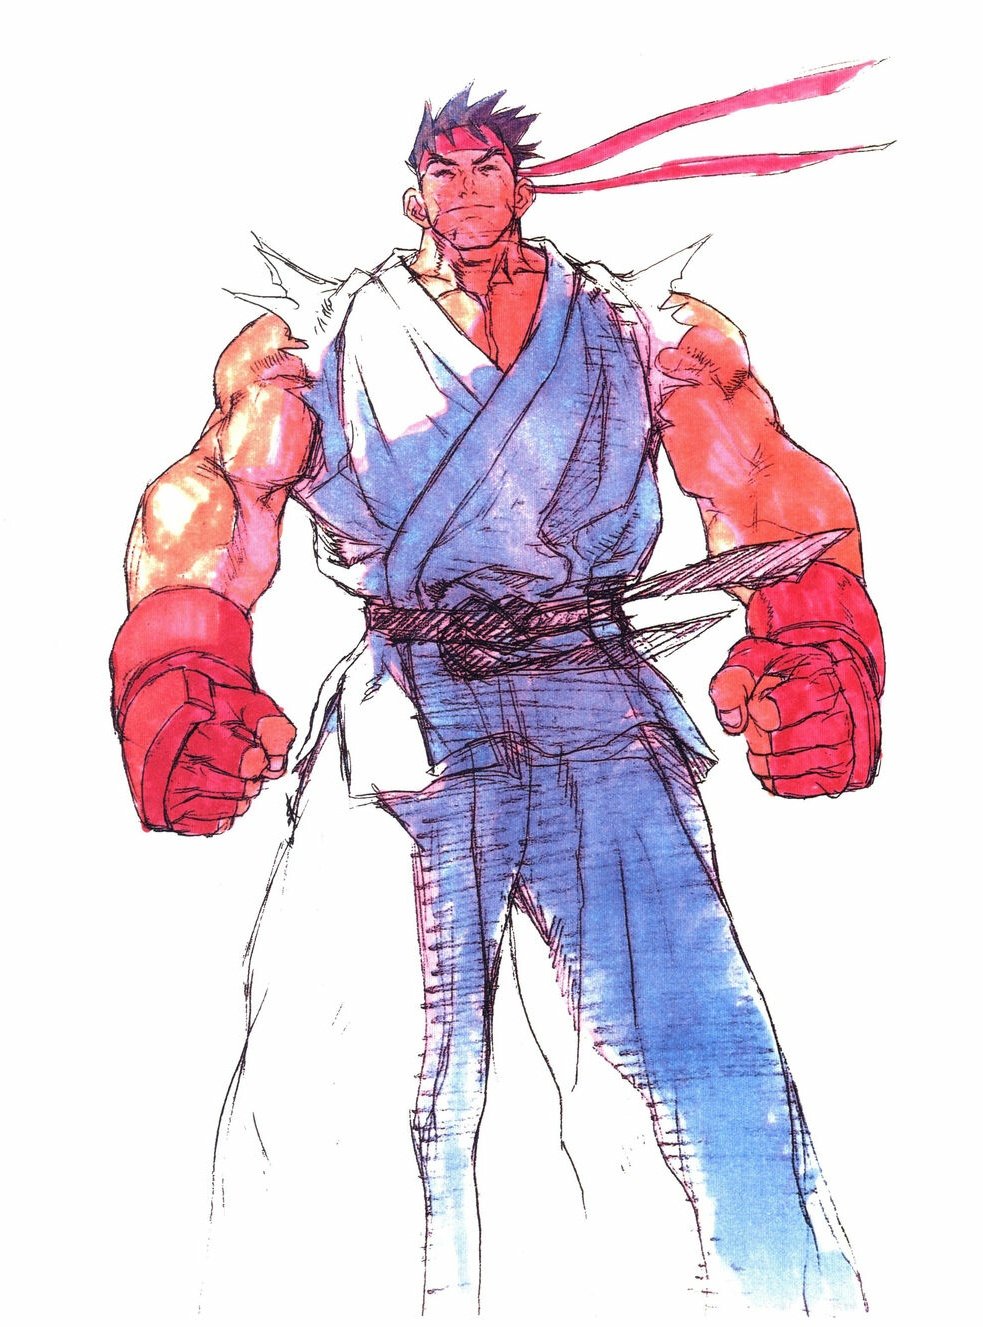 NBA Jam (the book) on X: 1997 character promo art from Marvel Super Heroes  vs. Street Fighter by Capcom.  / X